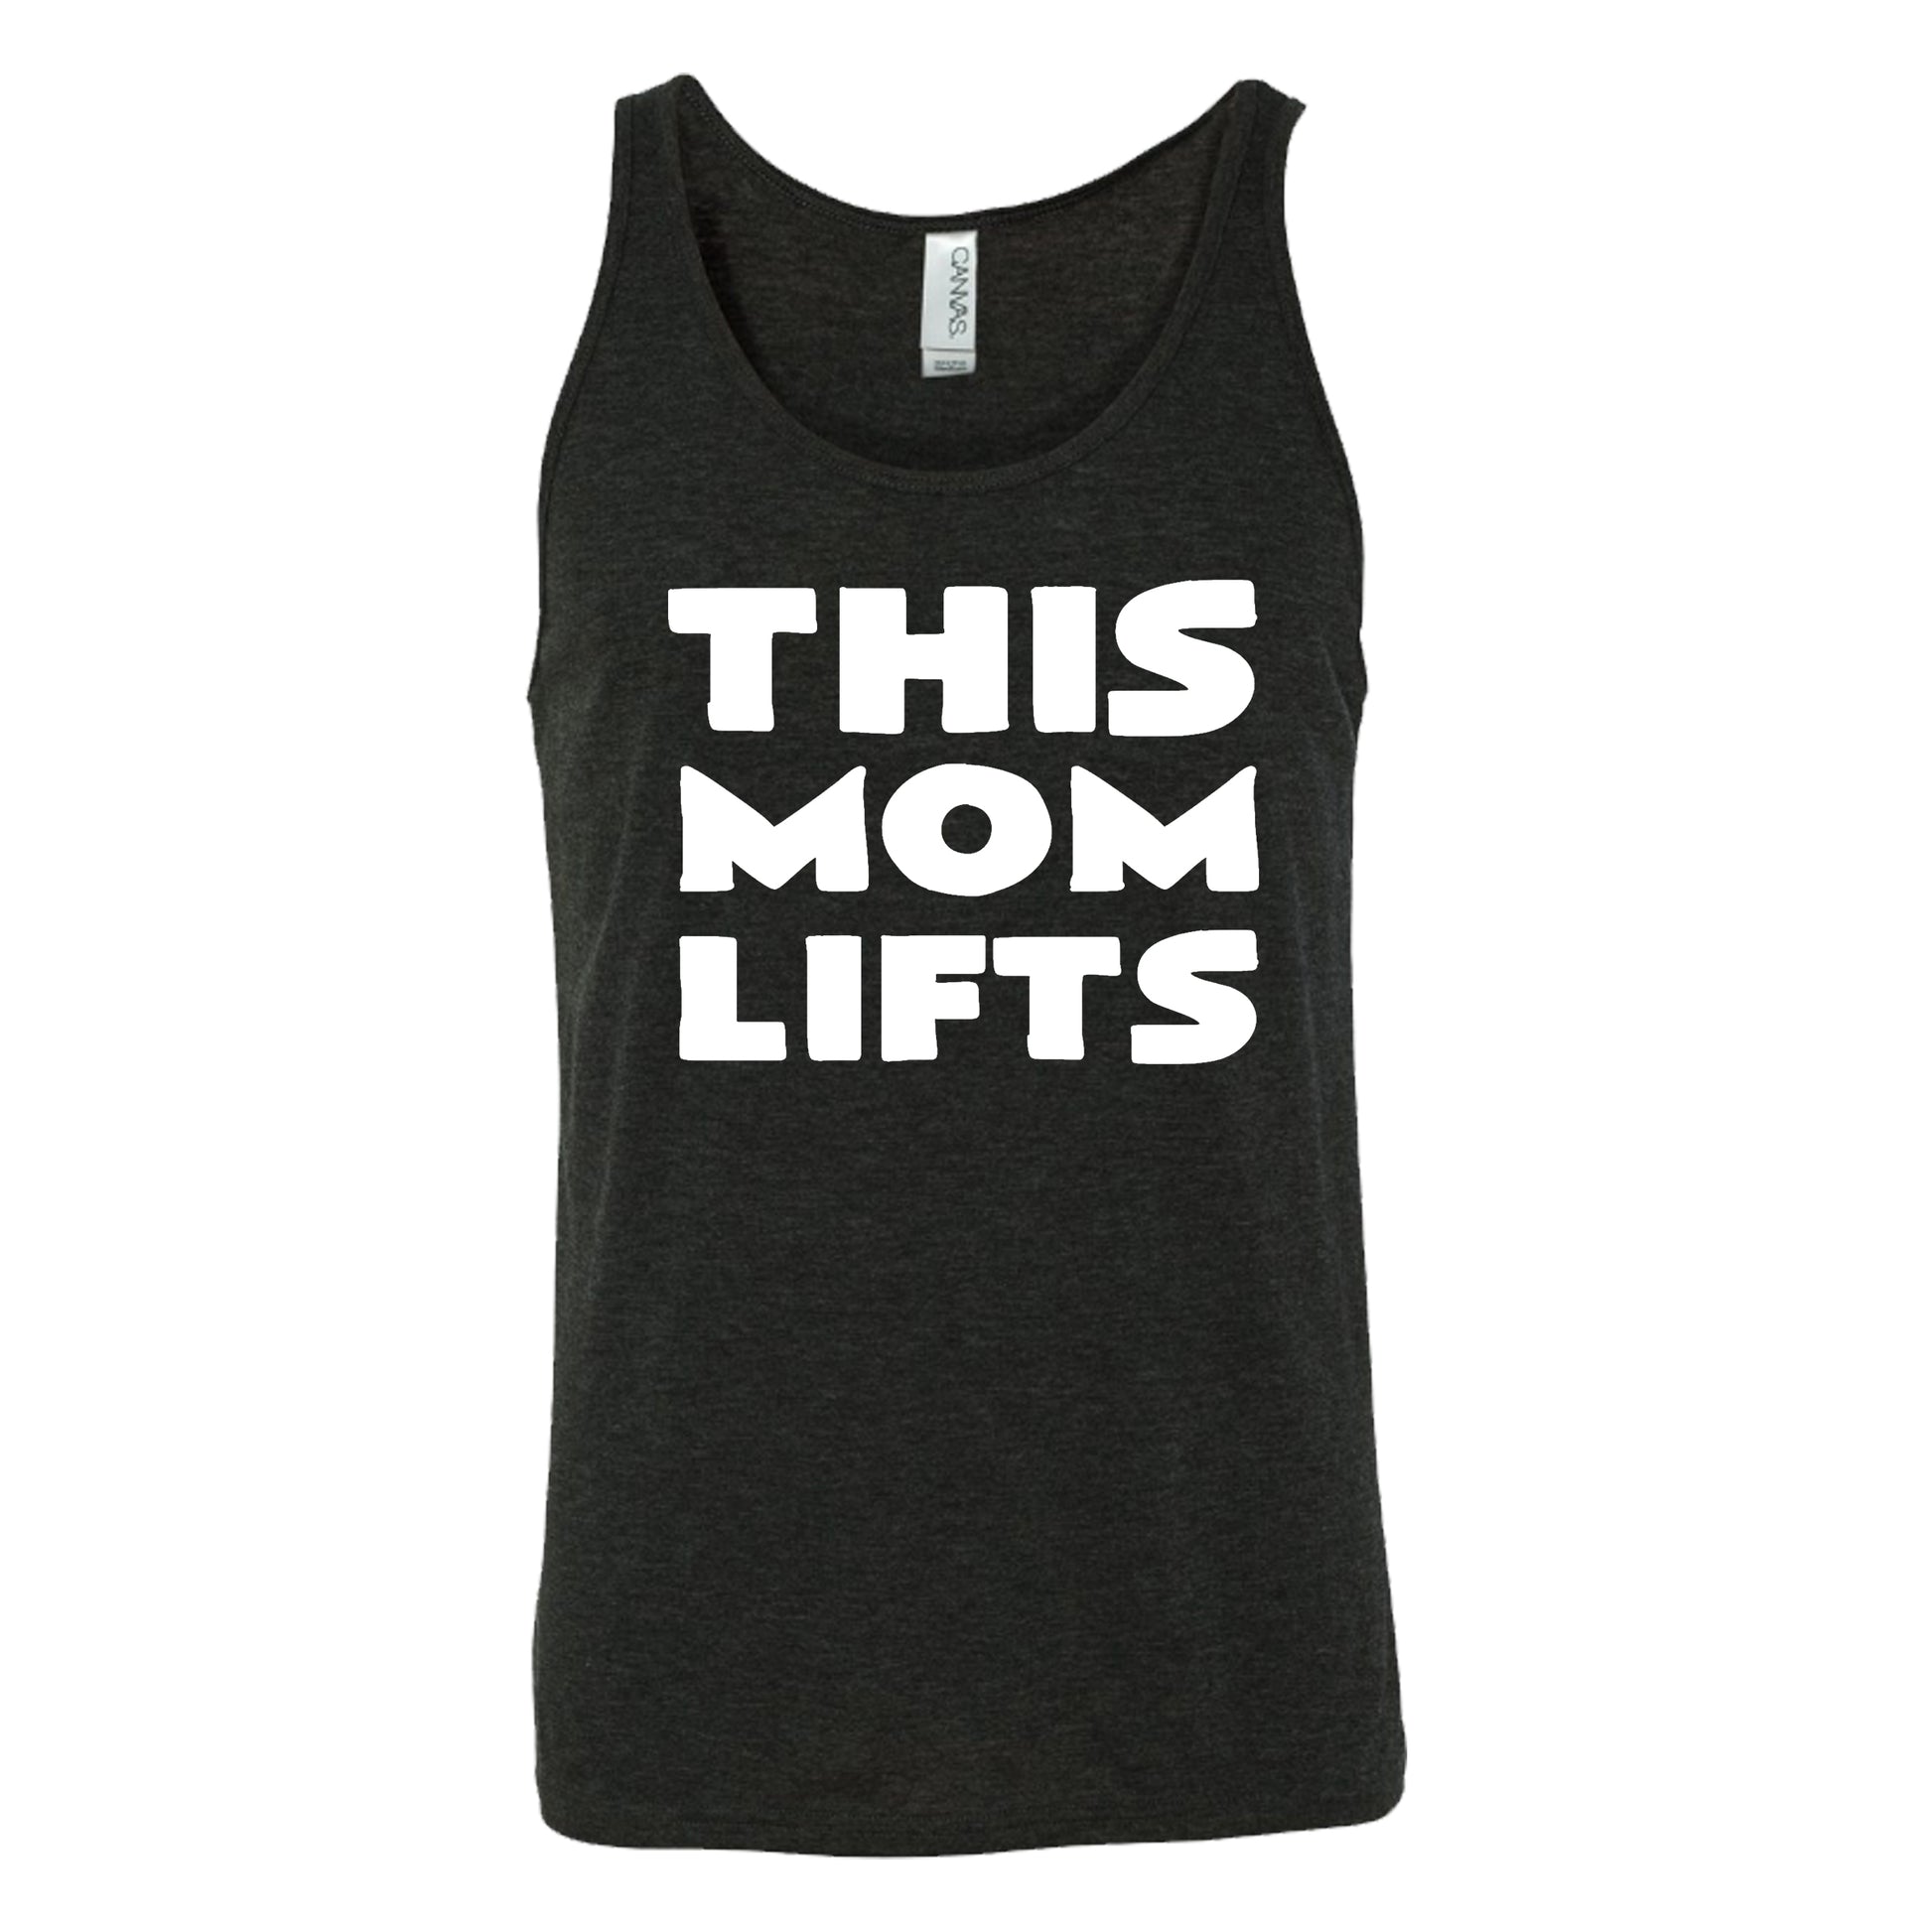 black unisex tank with the saying "this mom lifts" in the center in white lettering